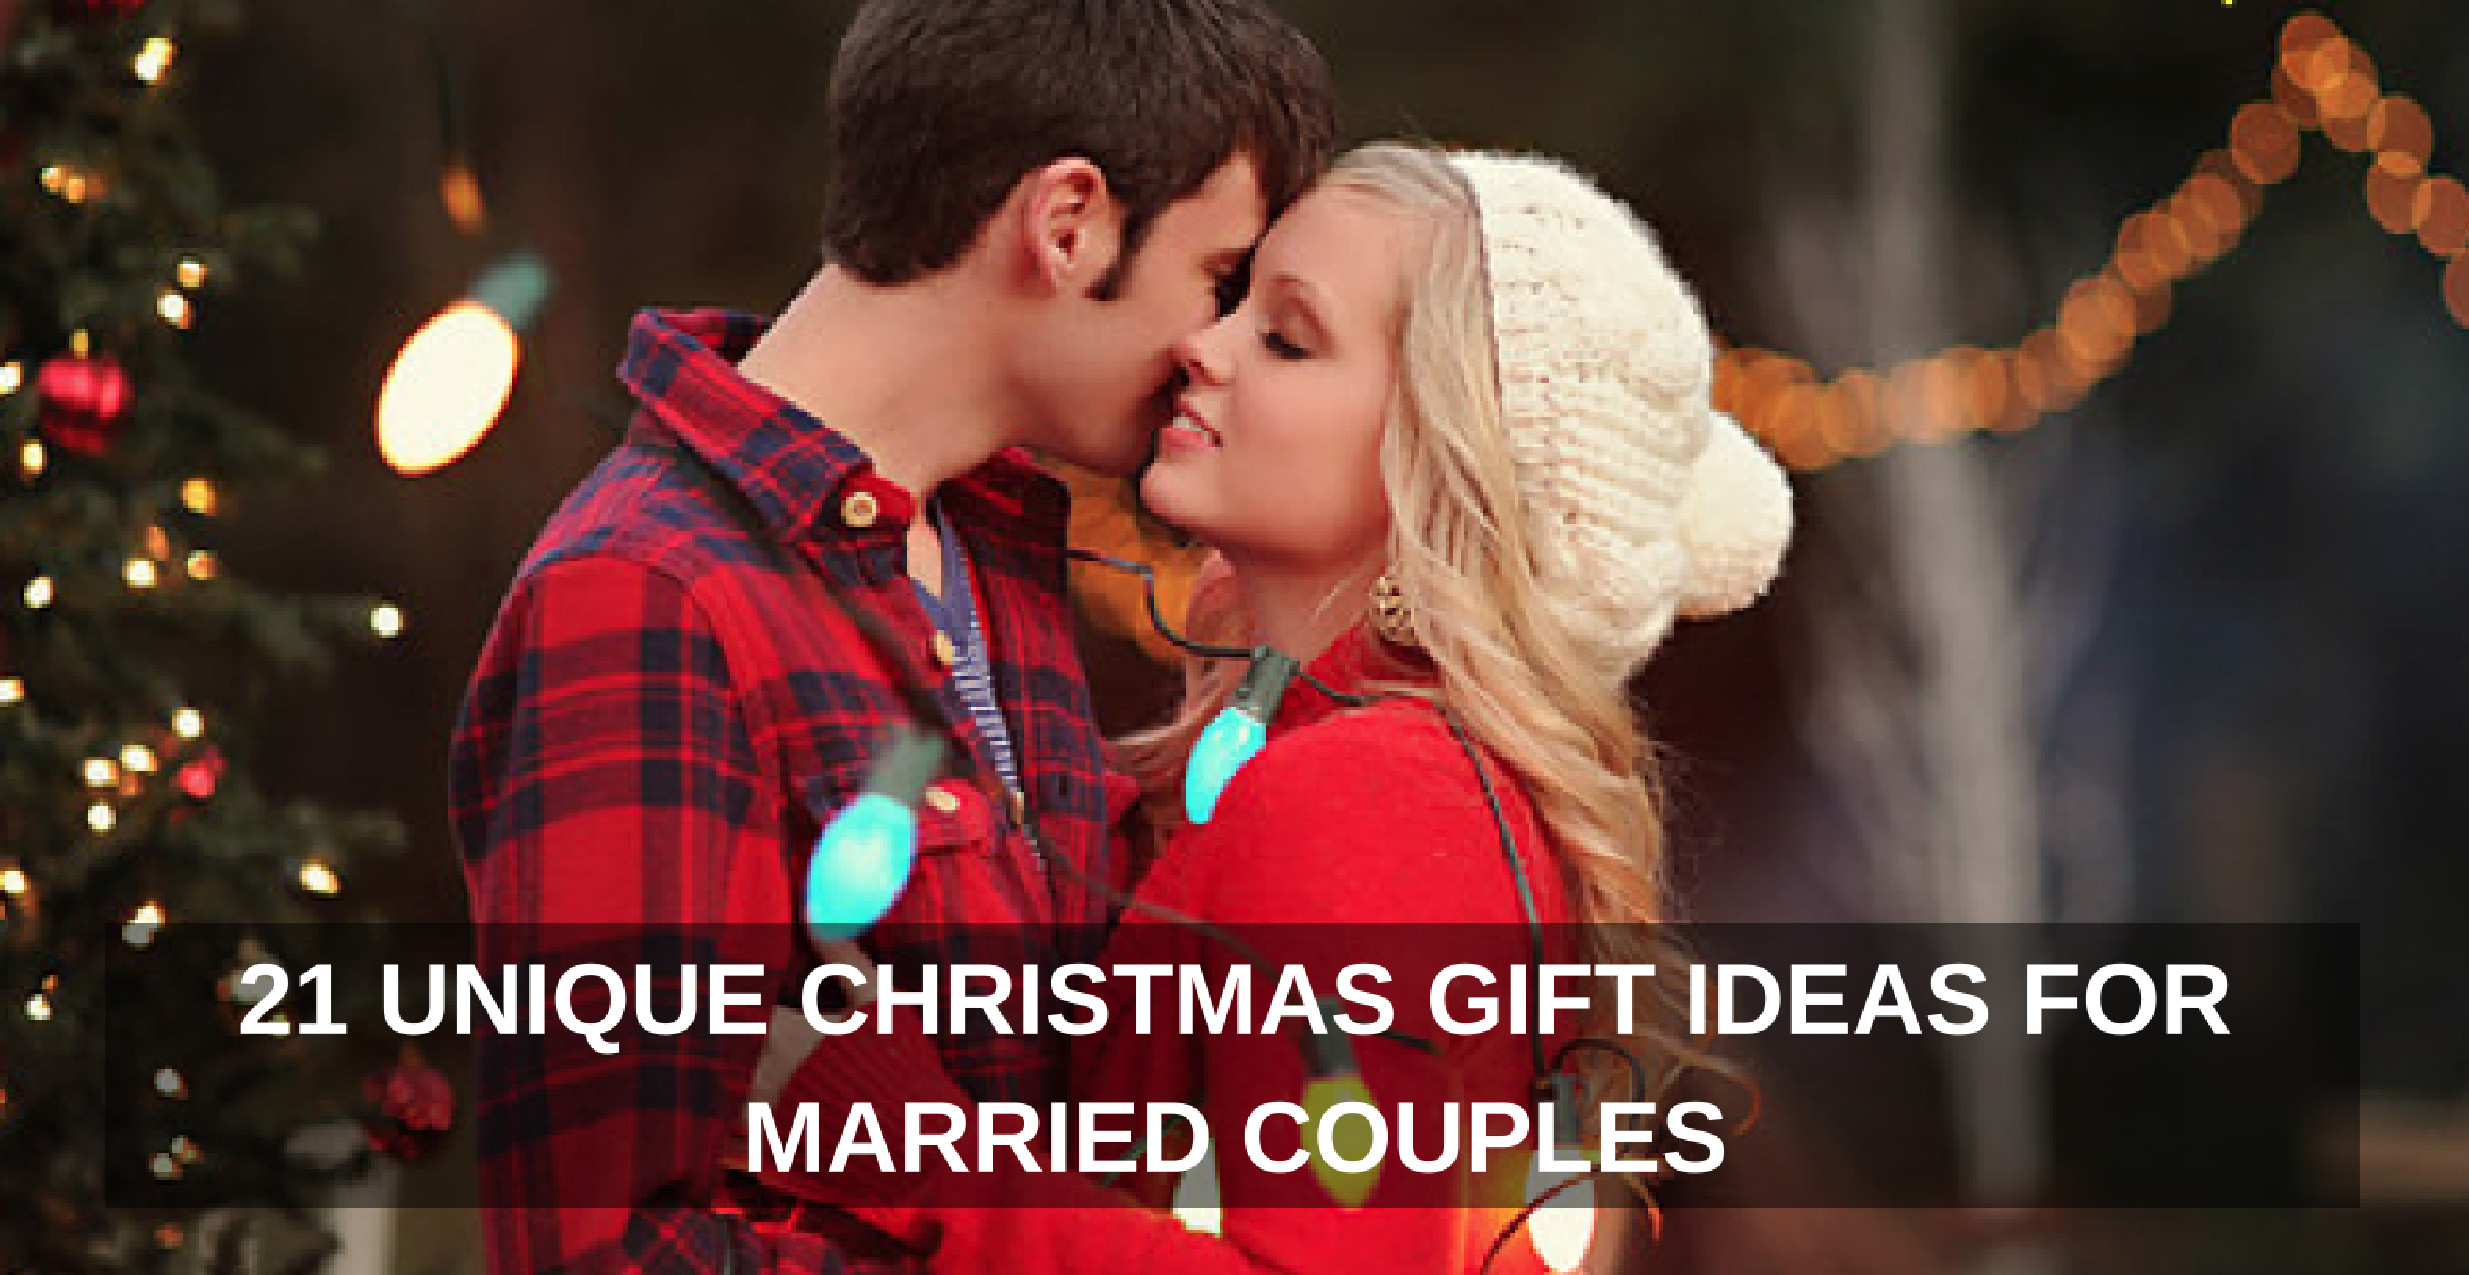 Couple Christmas Gift Ideas
 21 Unique Christmas Gift Ideas for Married Couples